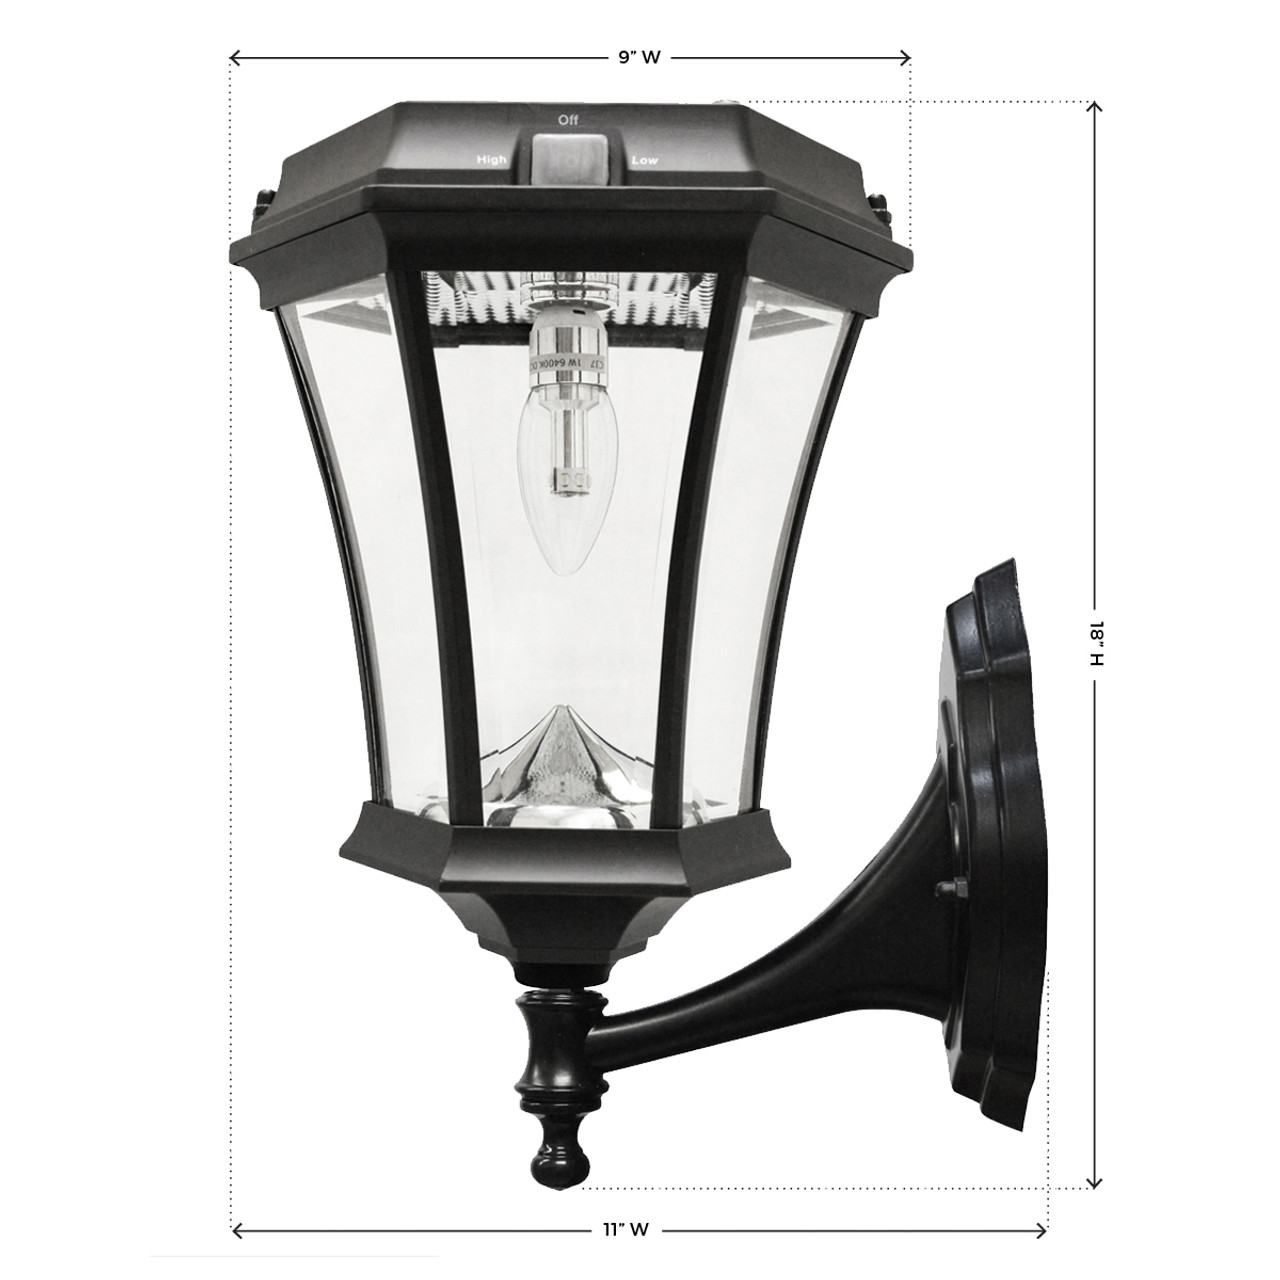 Gama Sonic Victorian Bulb Mounting Options with GS Solar LED Light Bulb GS -94B-FPW